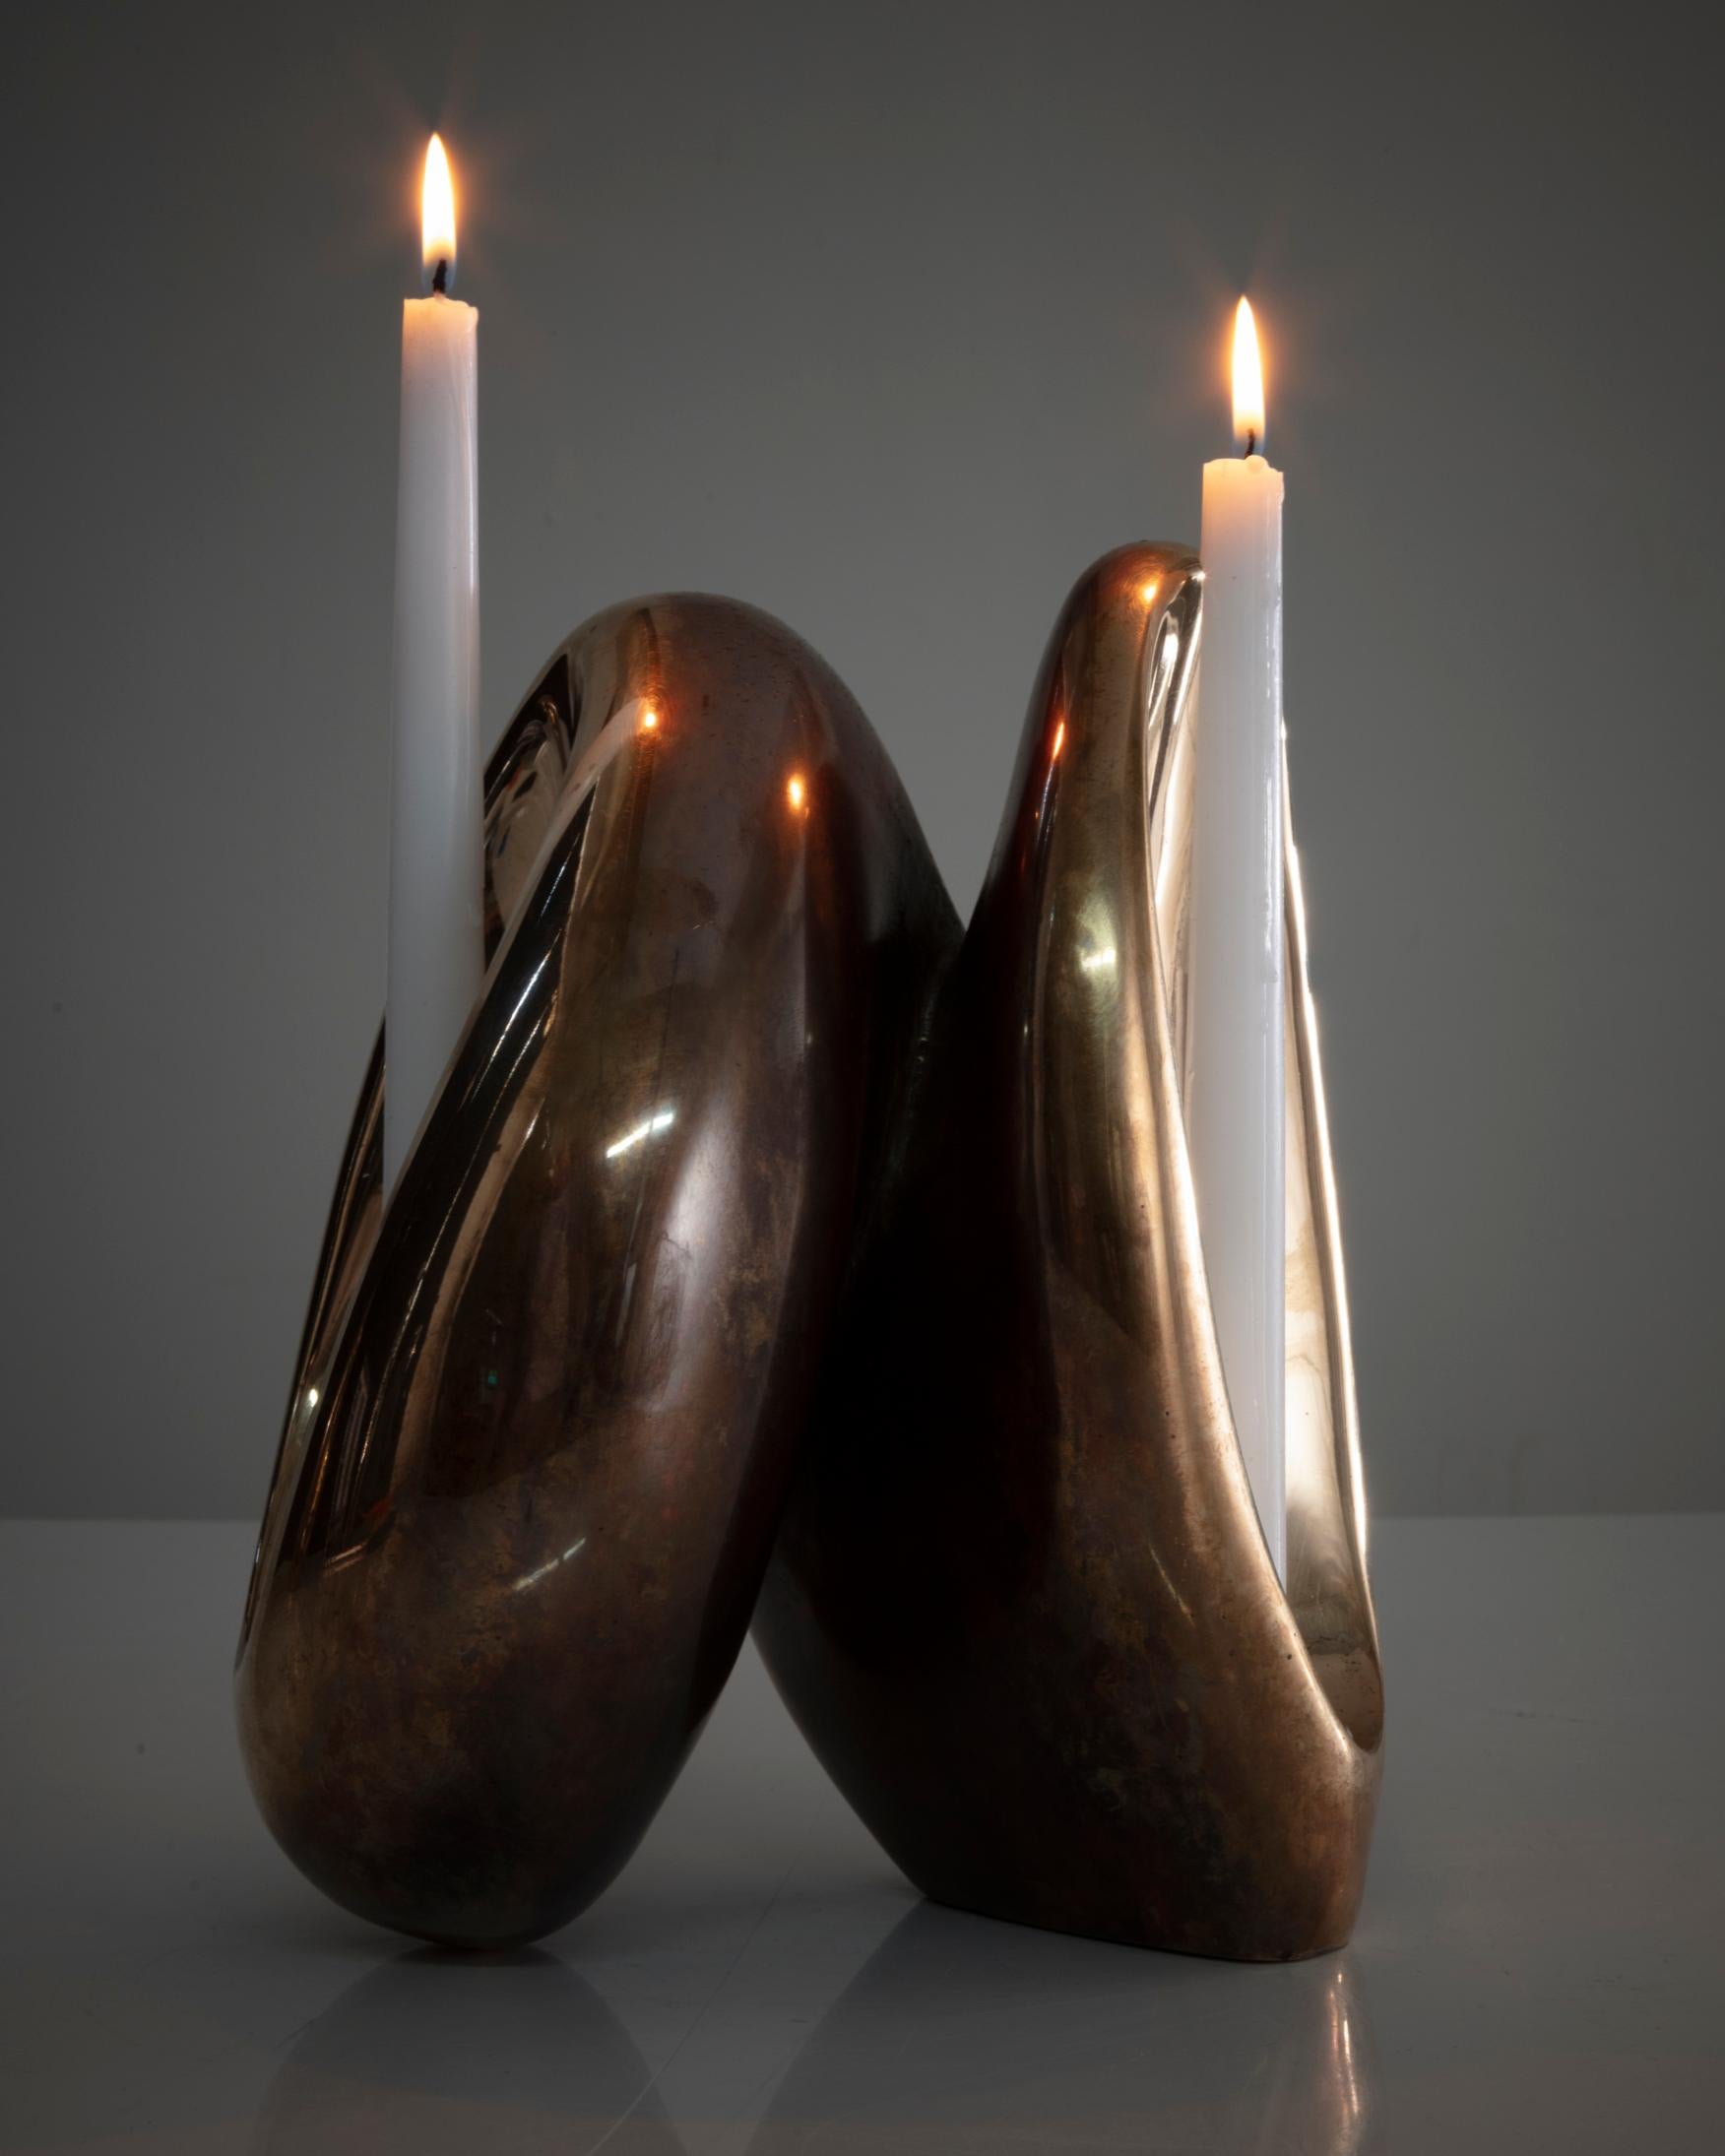 Contemporary Fertility Form Double Candleholder in Bronze by Rogan Gregory, 2018